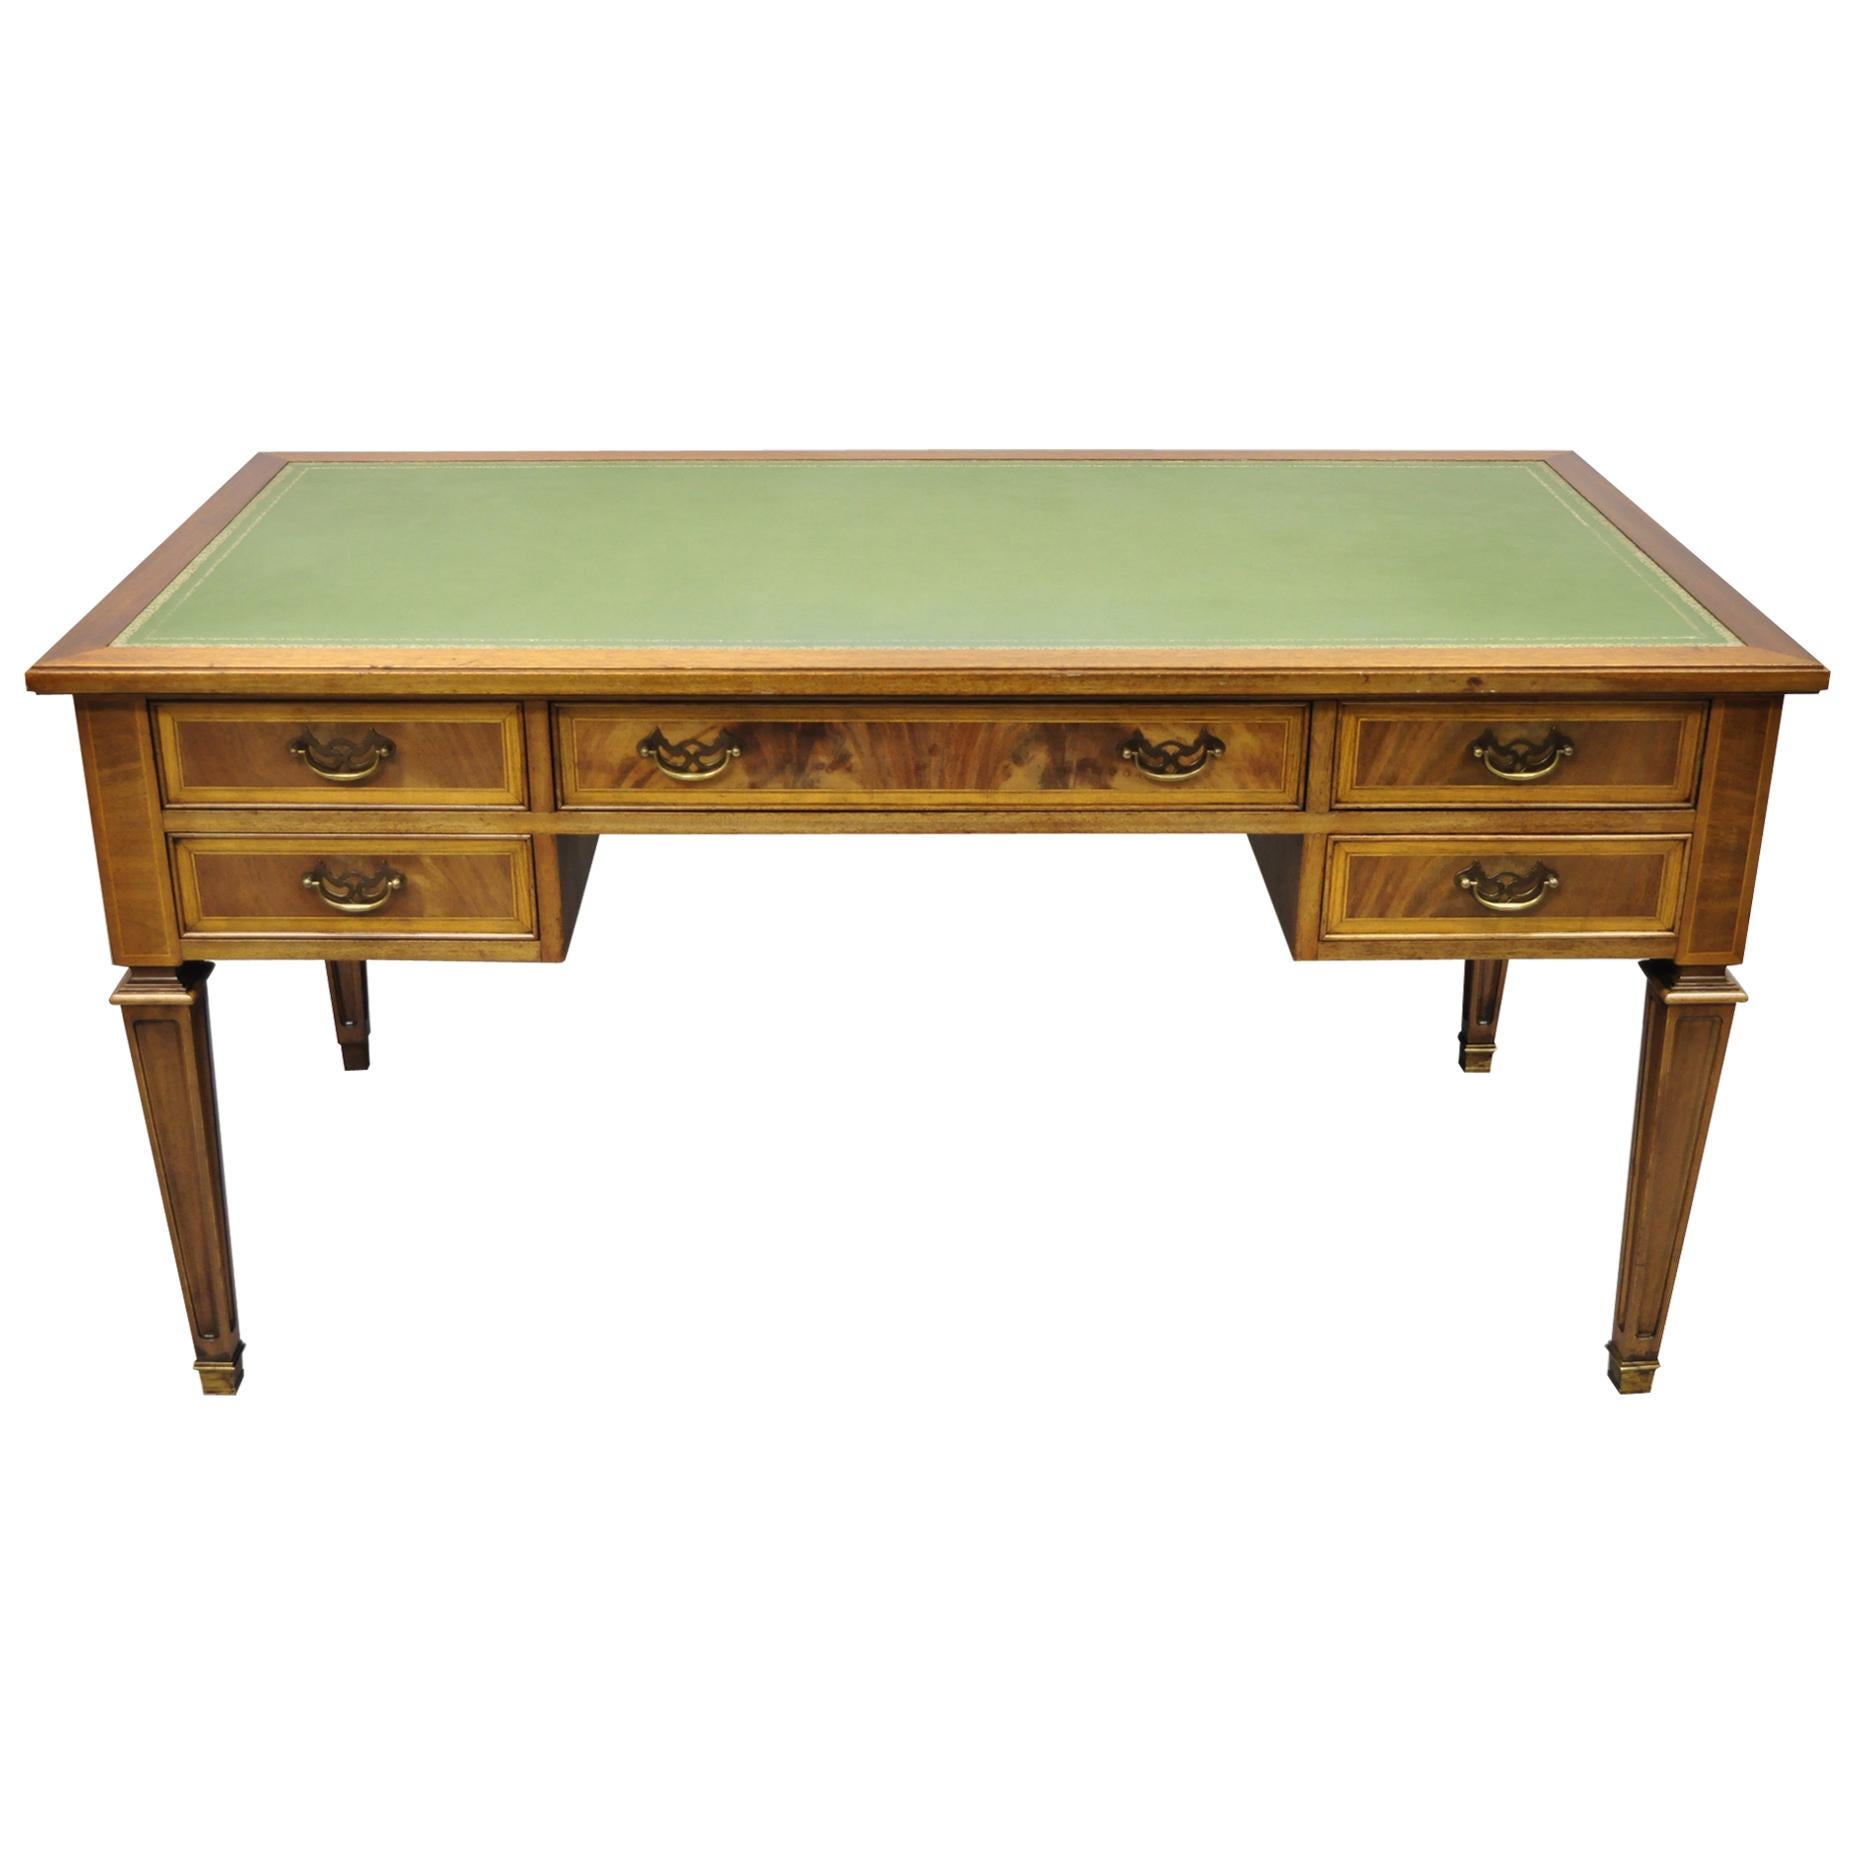 English Chippendale Green Leather Top Crotch Mahogany Executive Office Desk